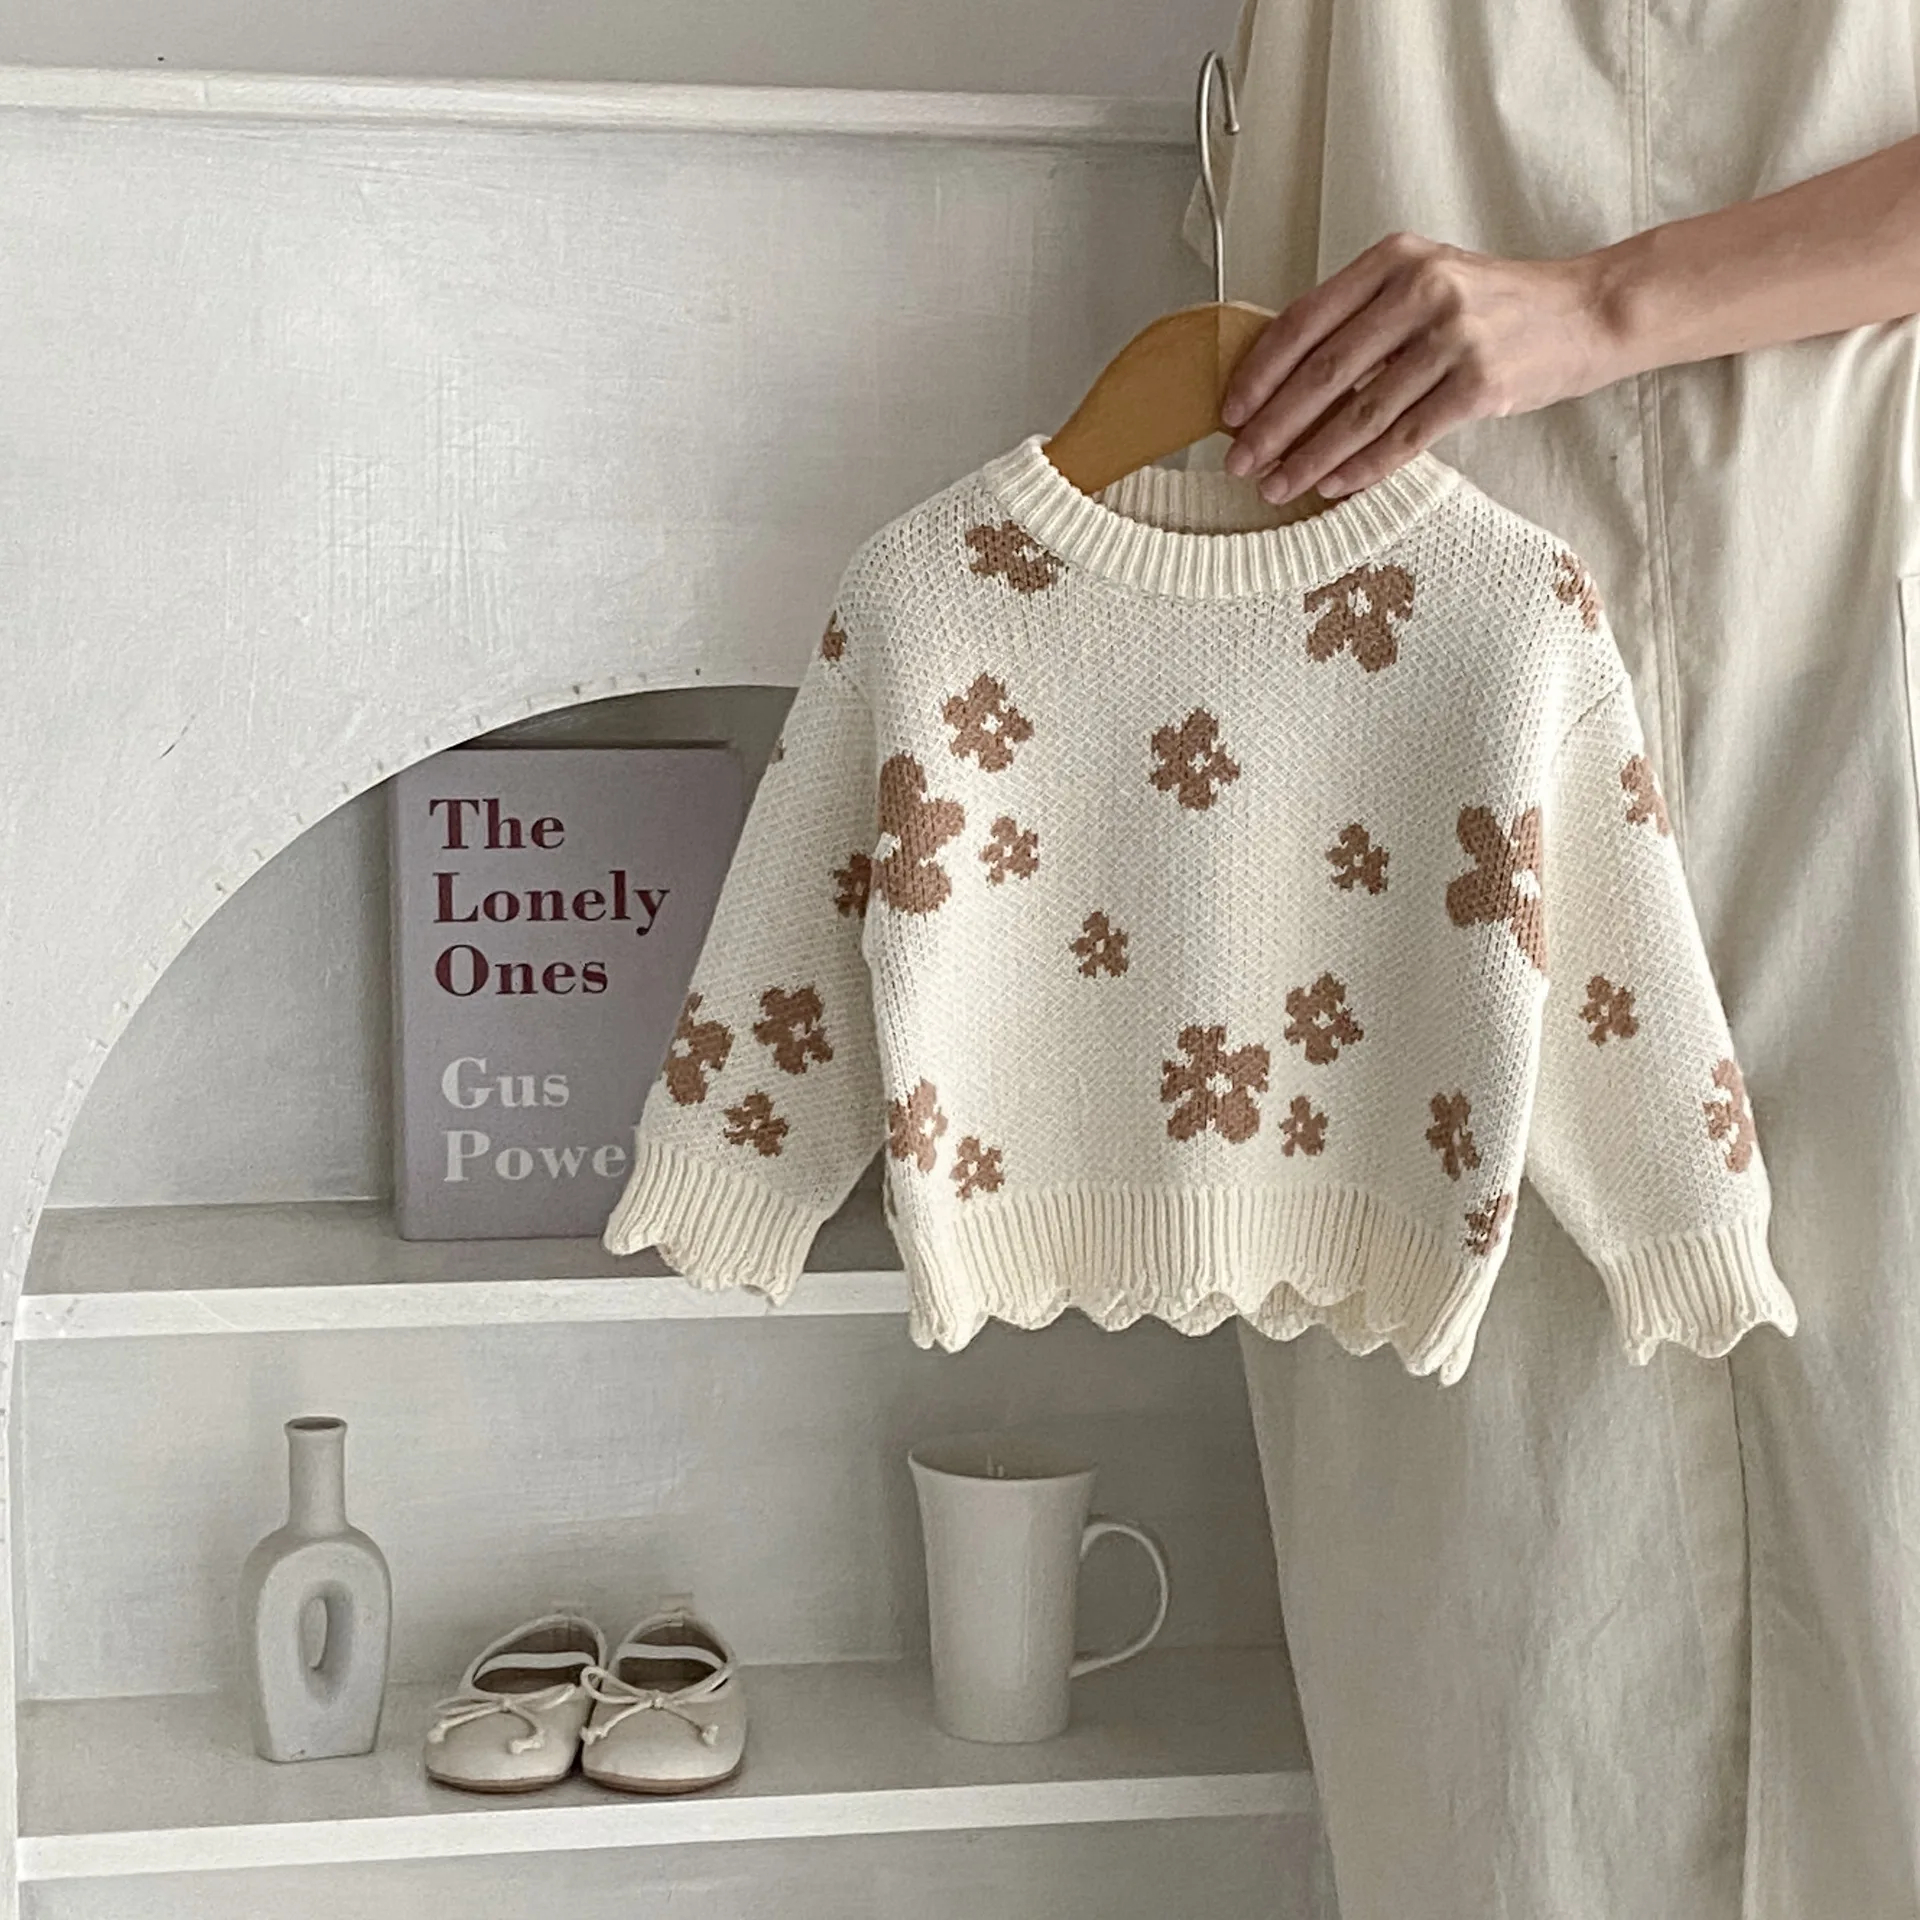 Engepapa Autumn Infant Pullover Knit Girls Flower Jacquard Sweater Cotton Baby Clothes